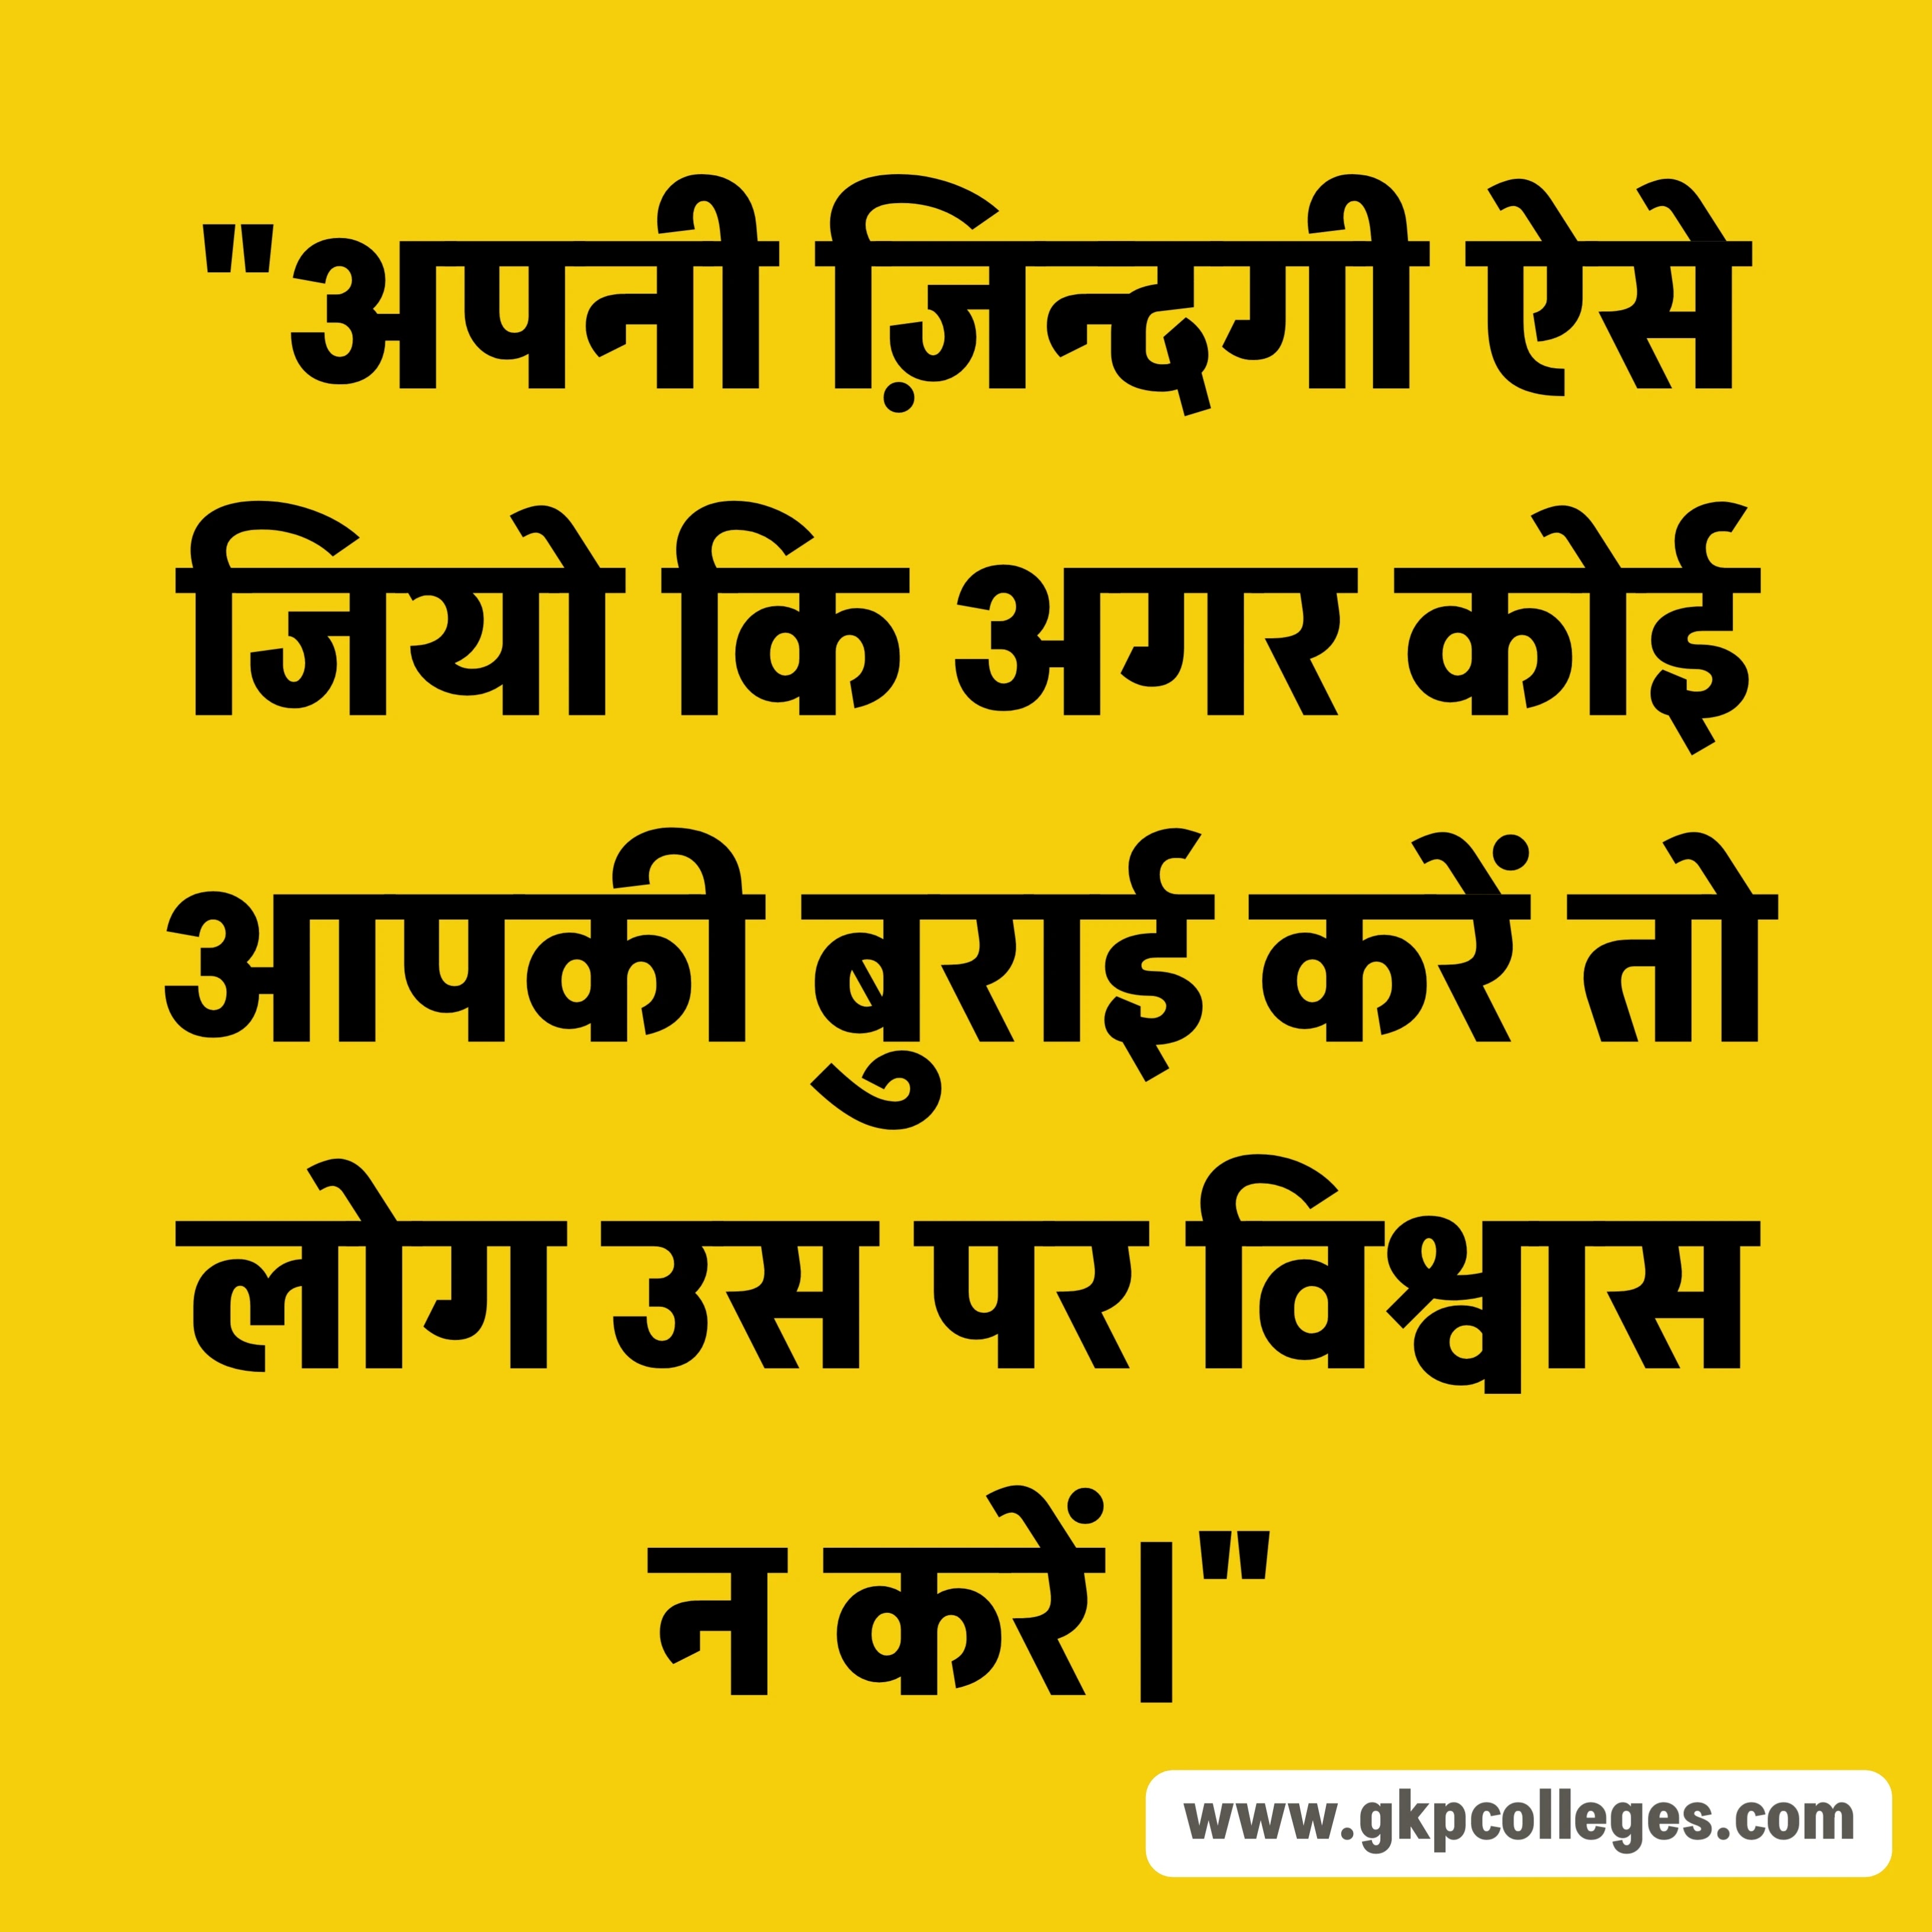 Best Hindi Quotes on Life 5